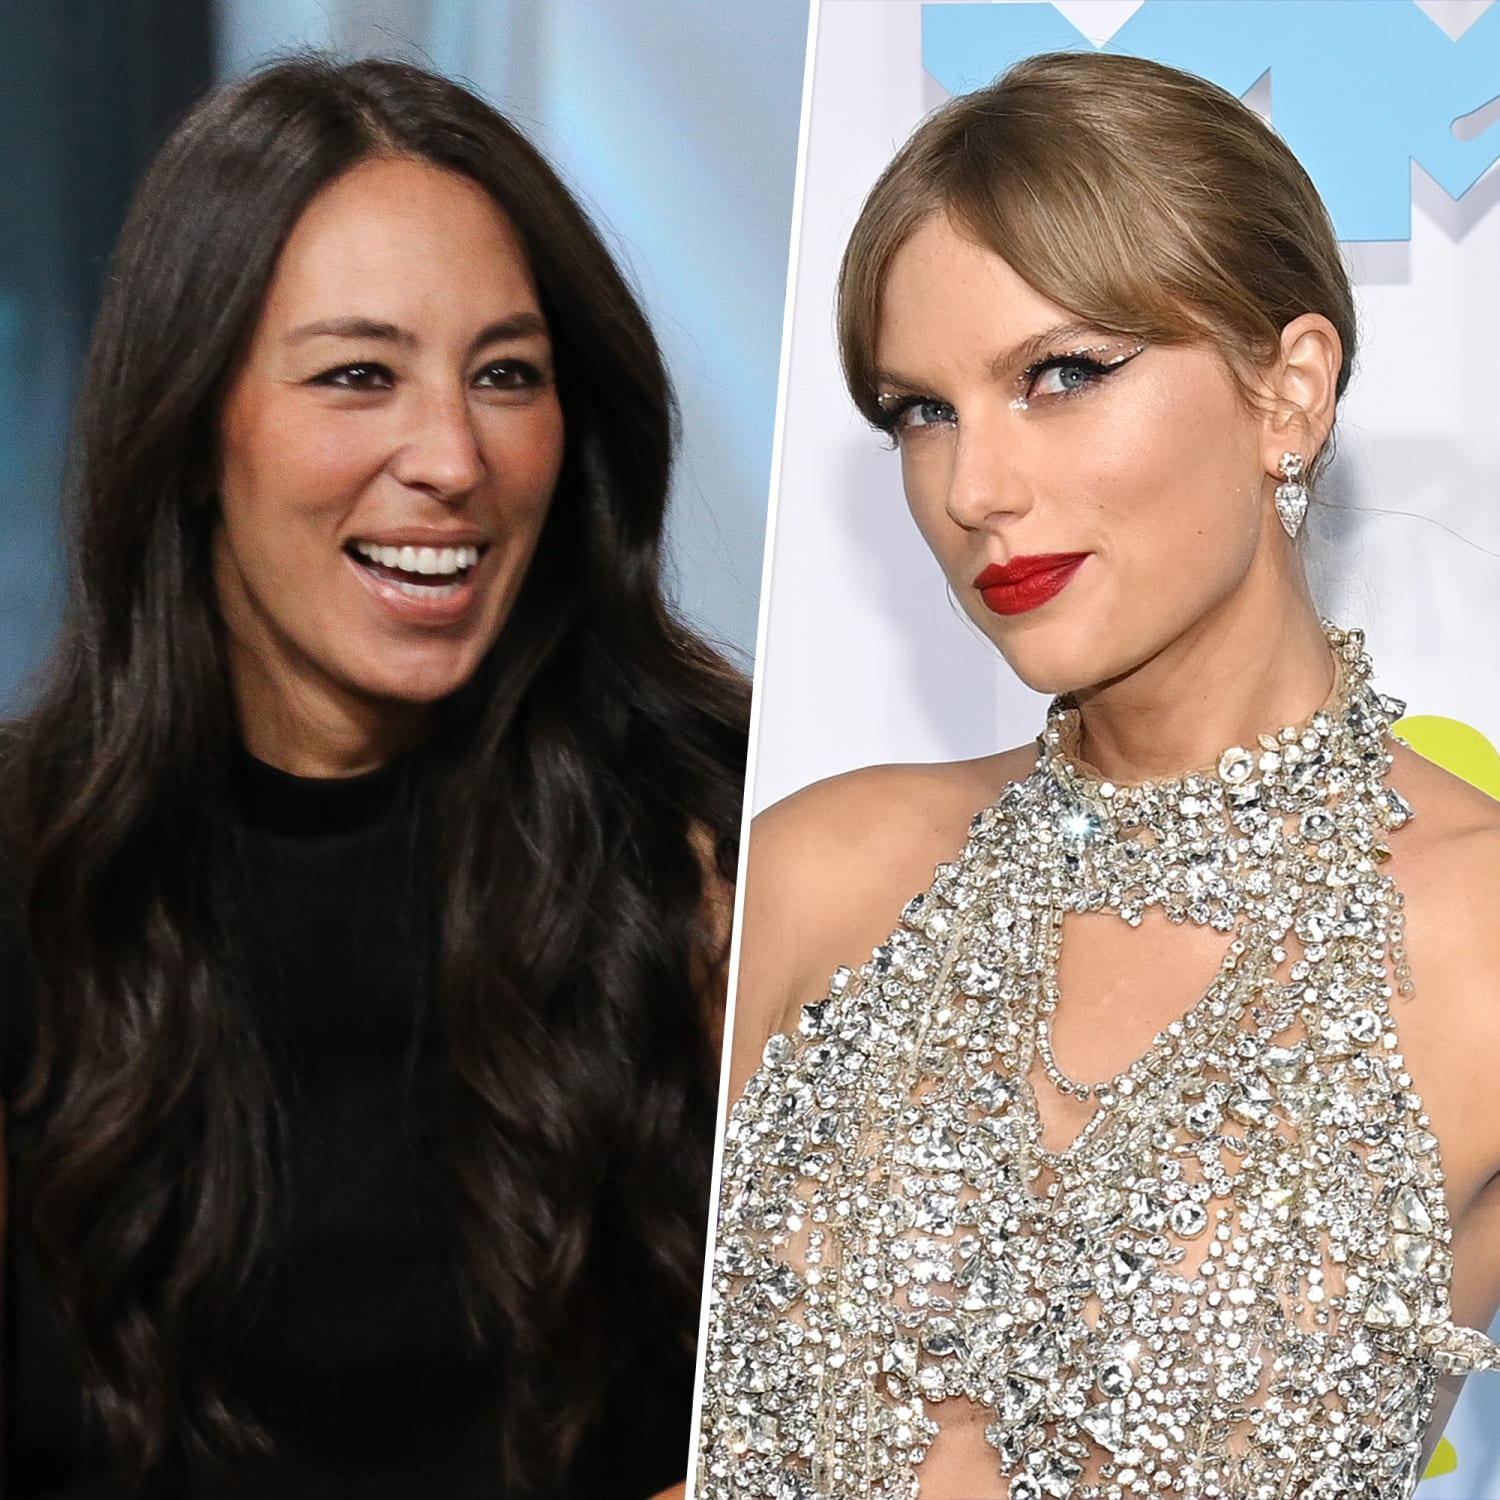 Joanna Gaines On The Gift Taylor Swift Sent Her The Girls Fought Over It